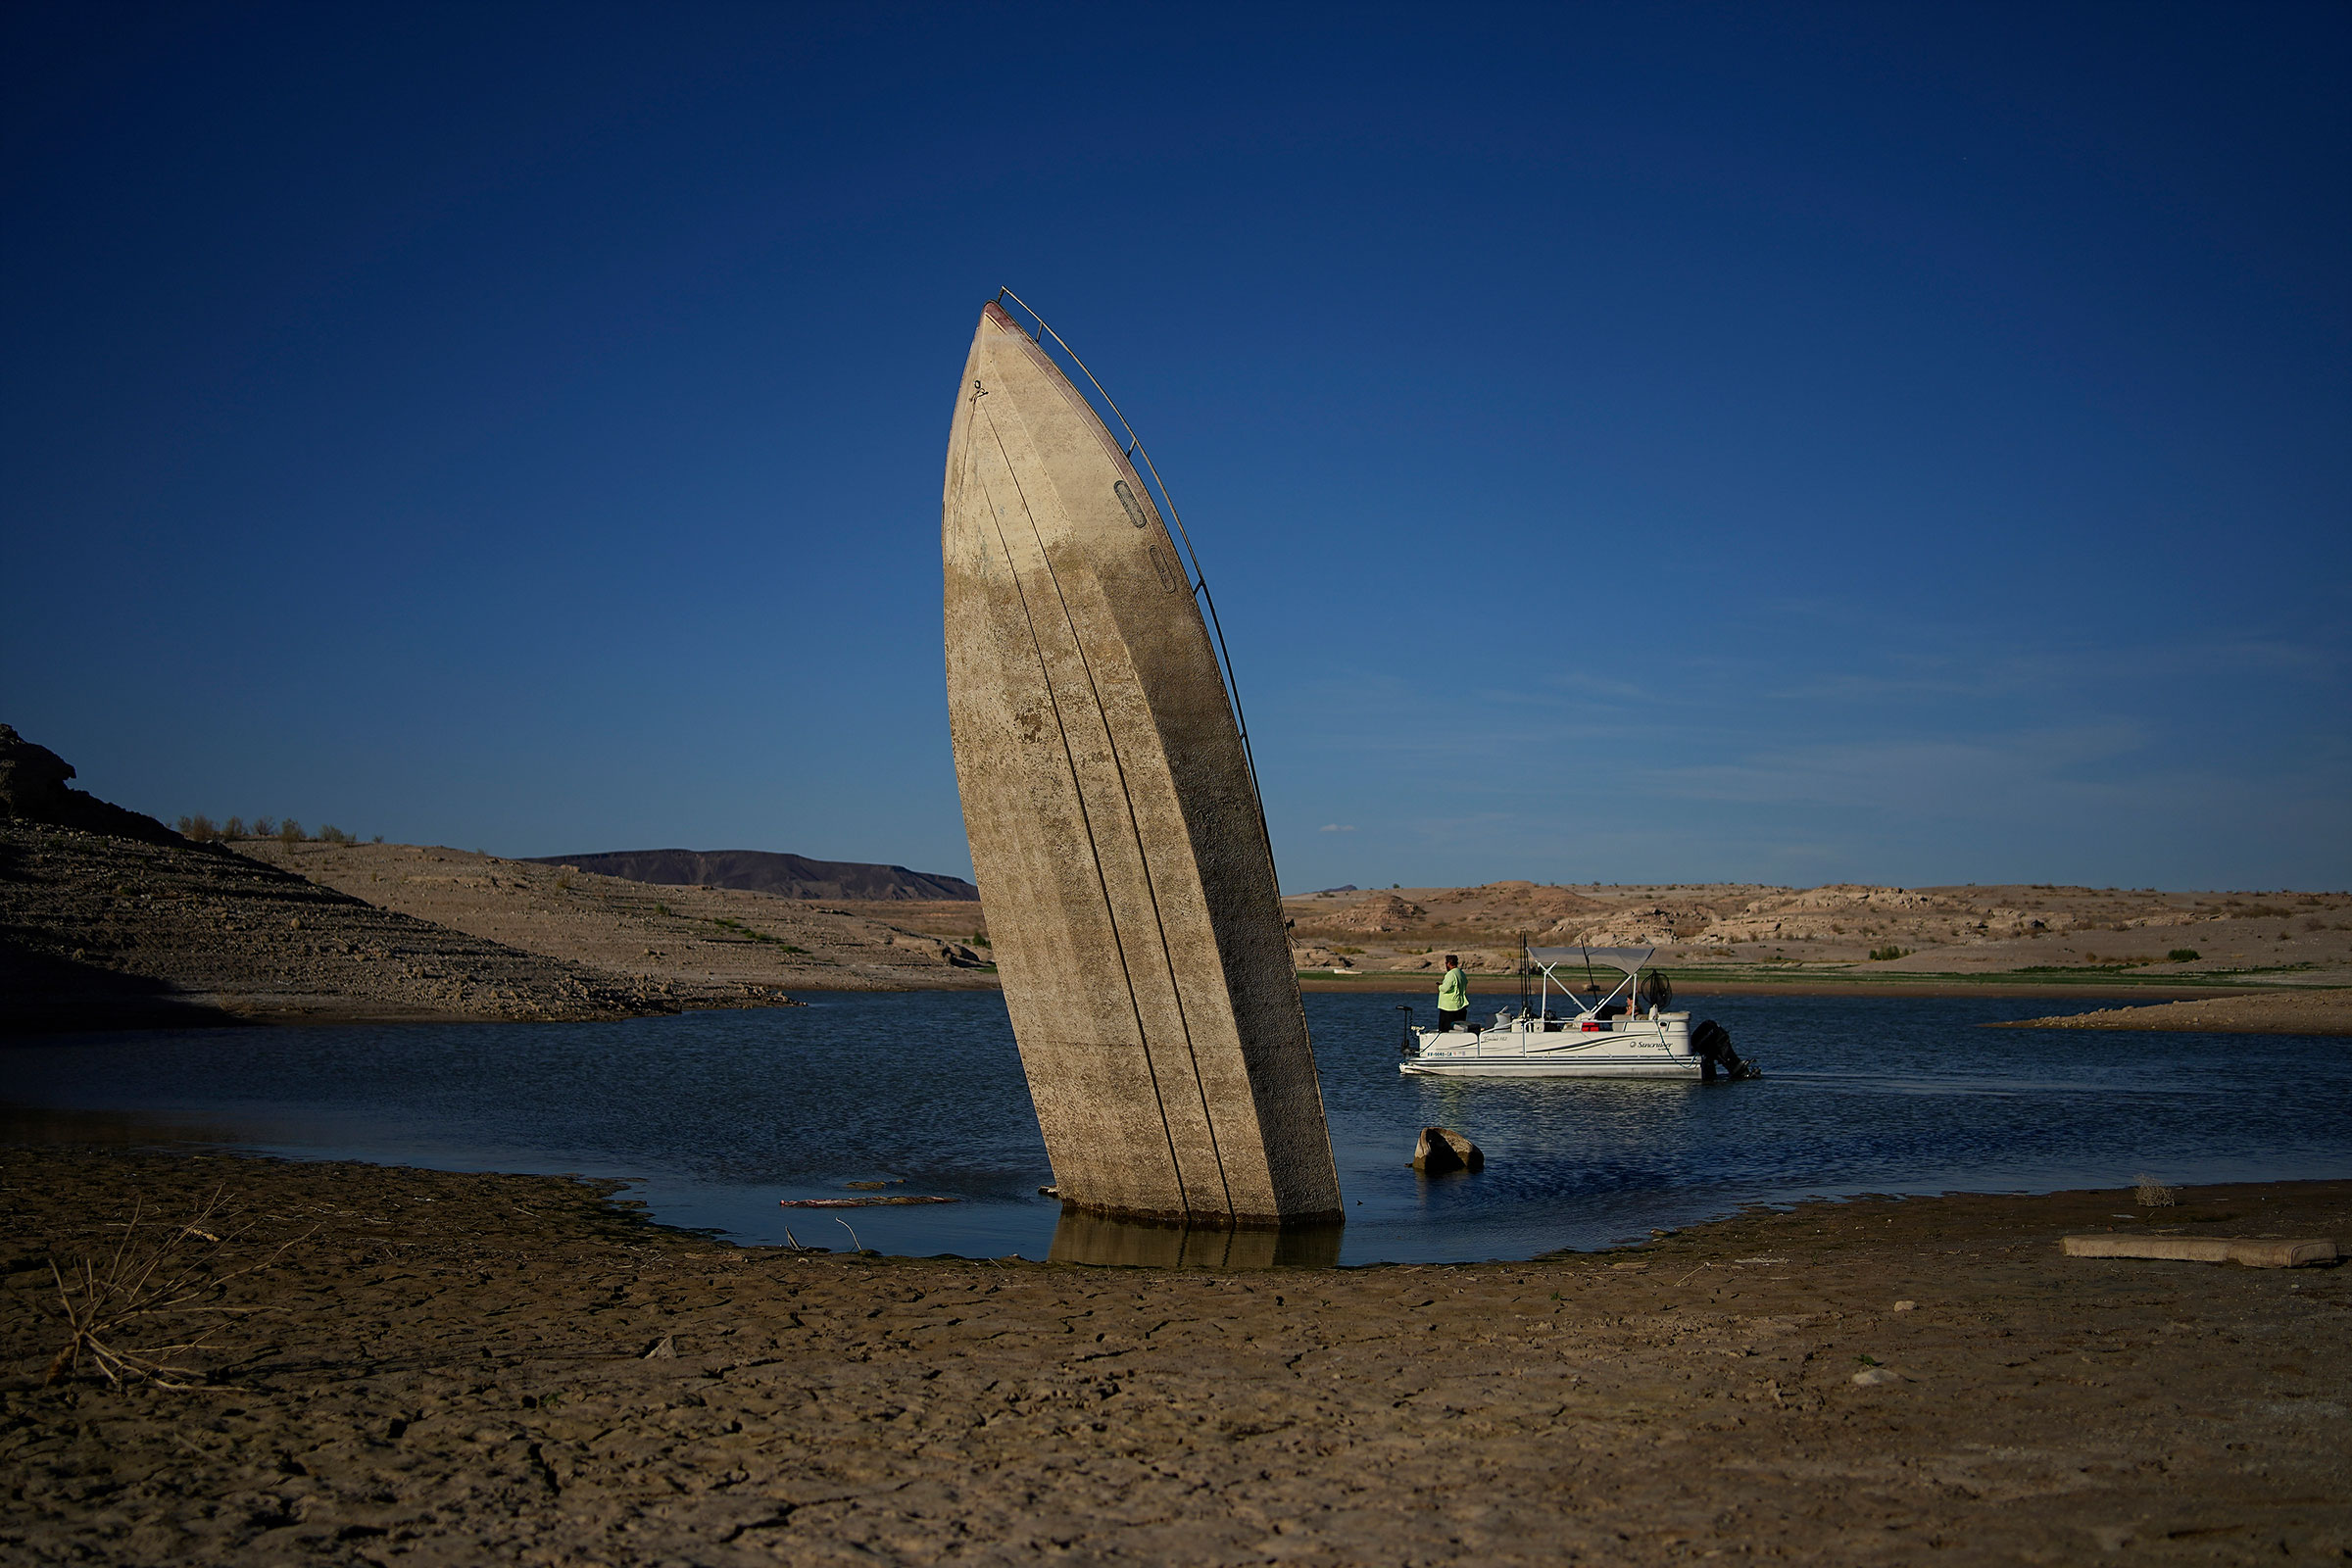 A formerly sunken boat sits upright into the air with its stern stuck in the mud along the shoreline of Lake Mead at the Lake Mead National Recreation Area, near Boulder City, Nev. on June 10, 2022. (John Locher—AP)